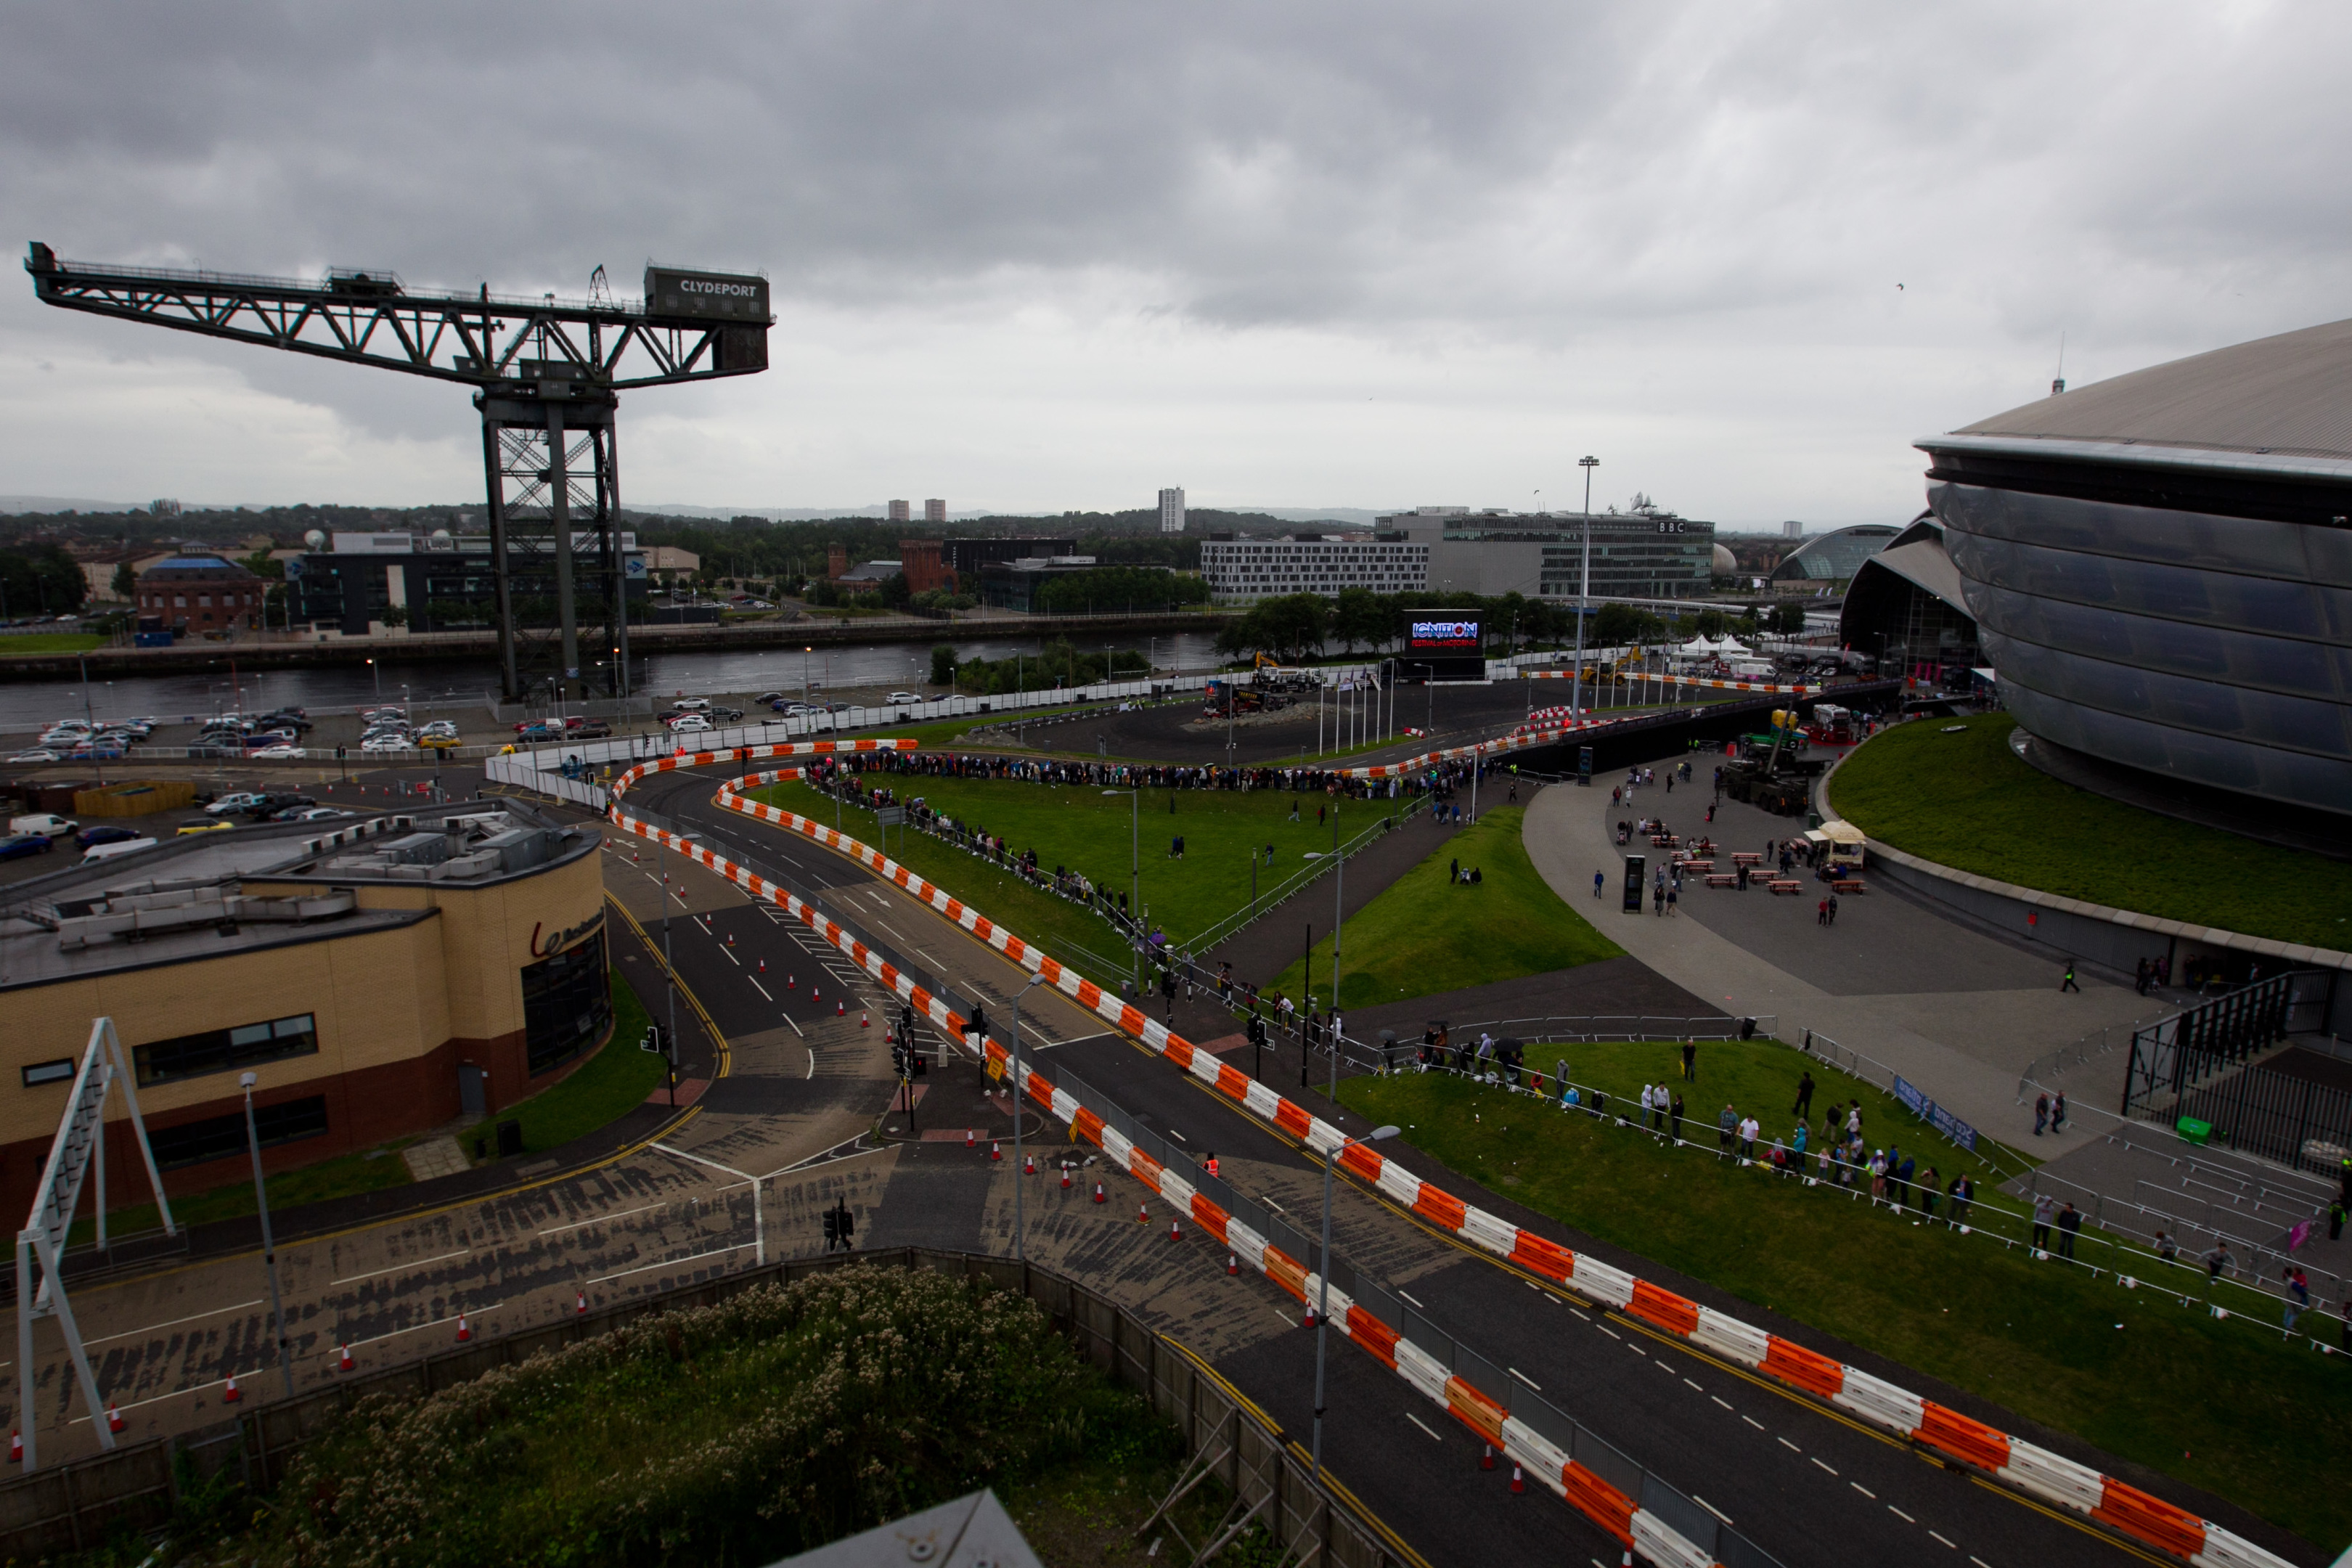 Ignition Festival car show at The SECC / SSE Hydro Arena, in Glasgow (Andrew Cawley/Sunday Post)